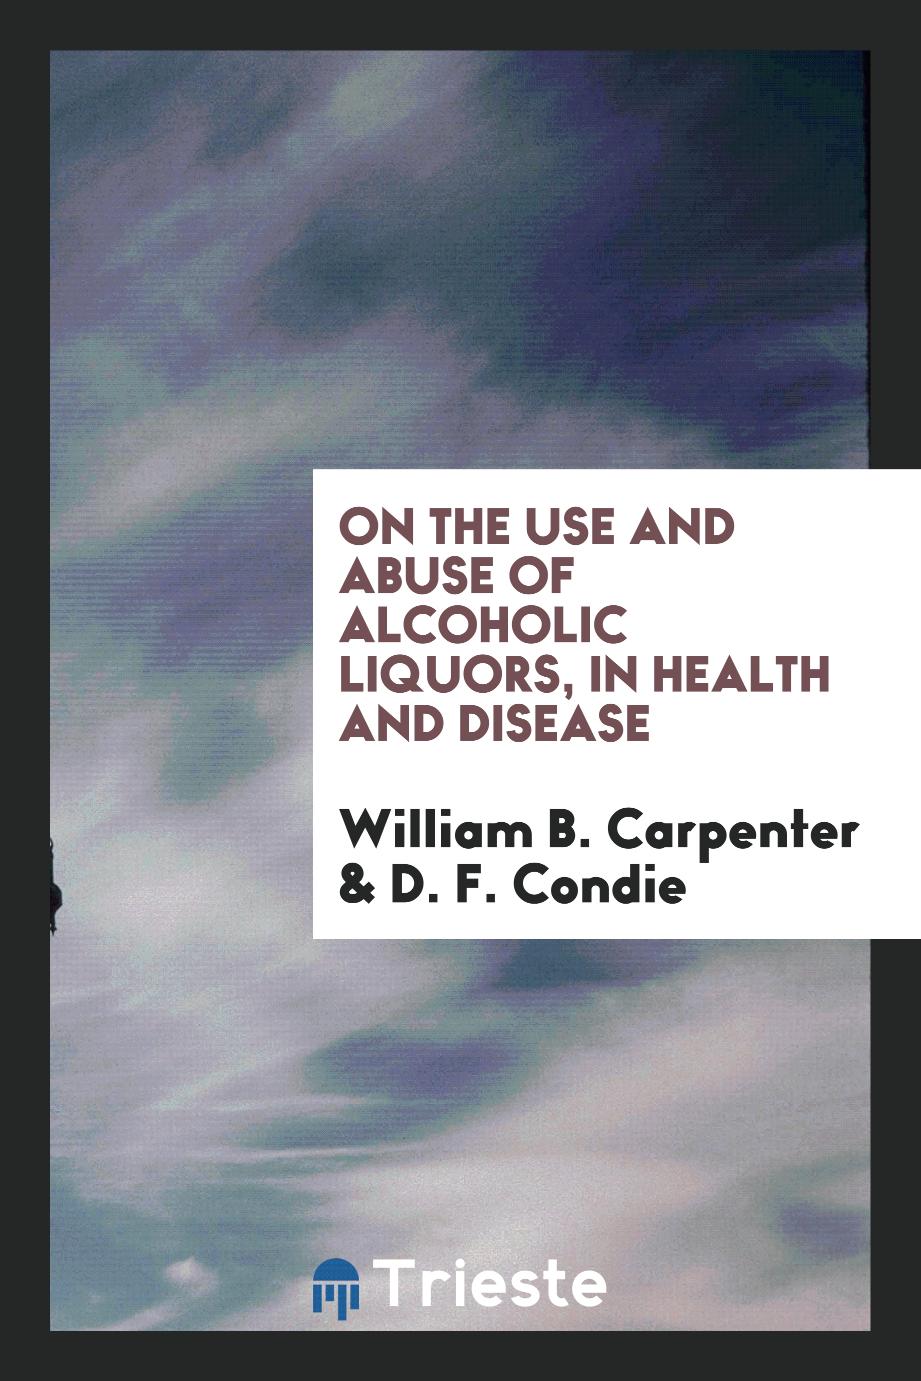 On the use and abuse of alcoholic liquors, in health and disease